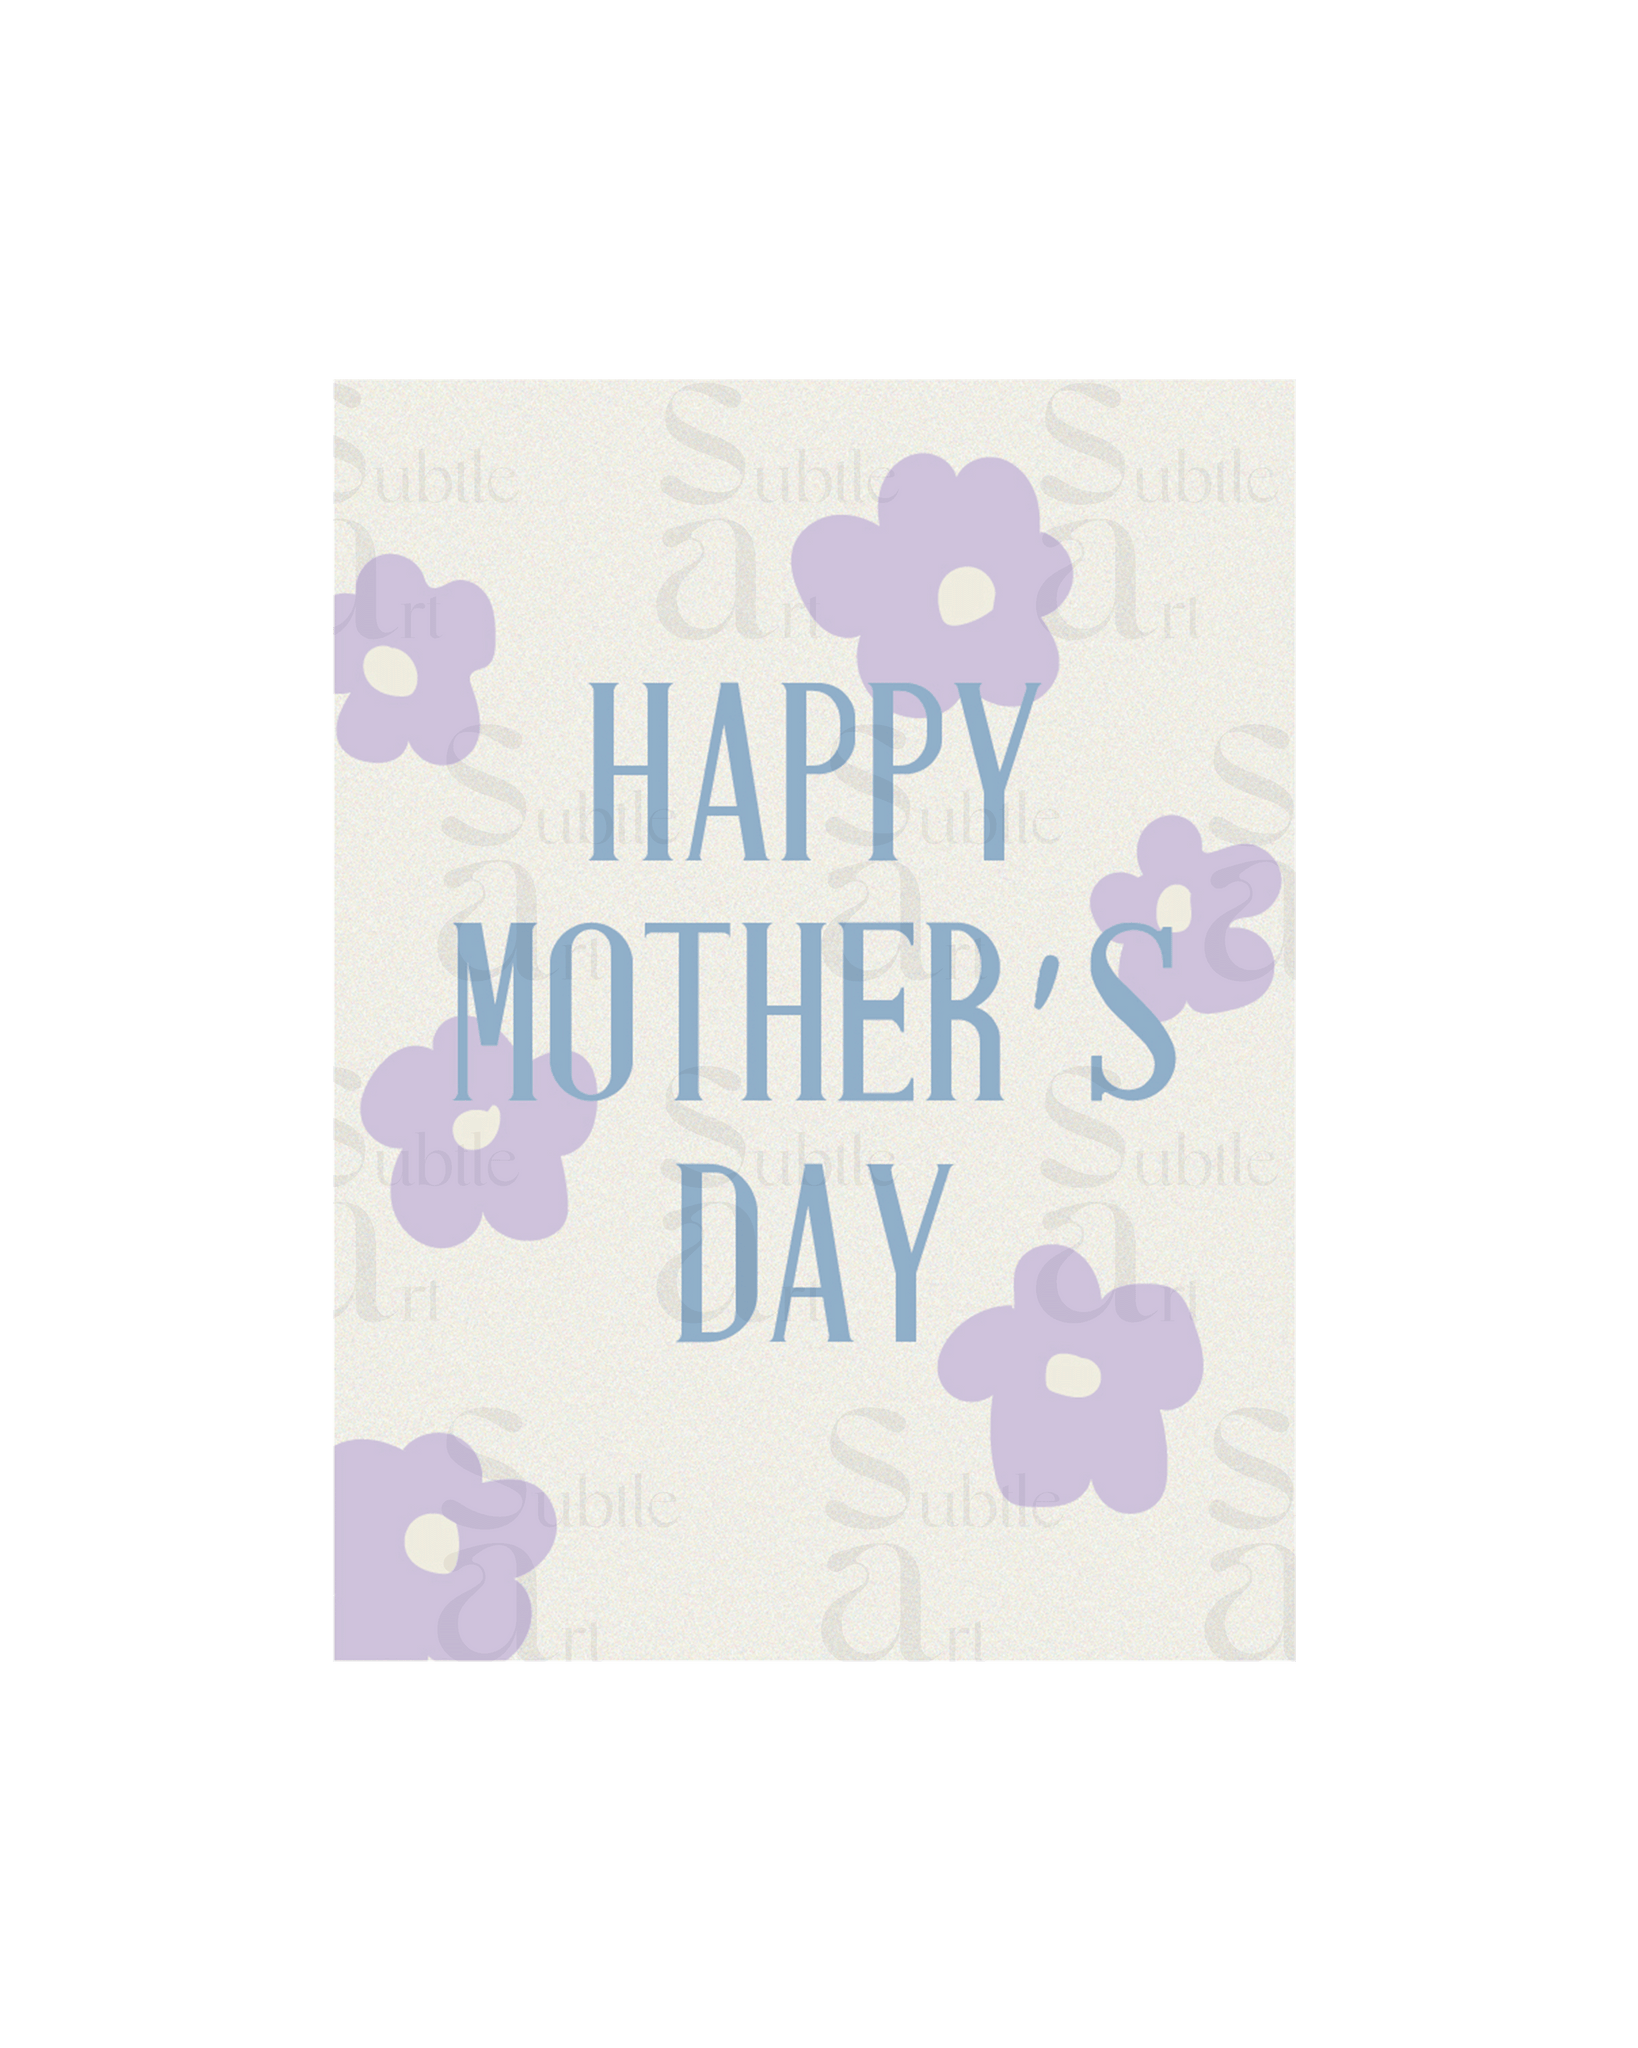 Digital Card - Mother's Day - 2